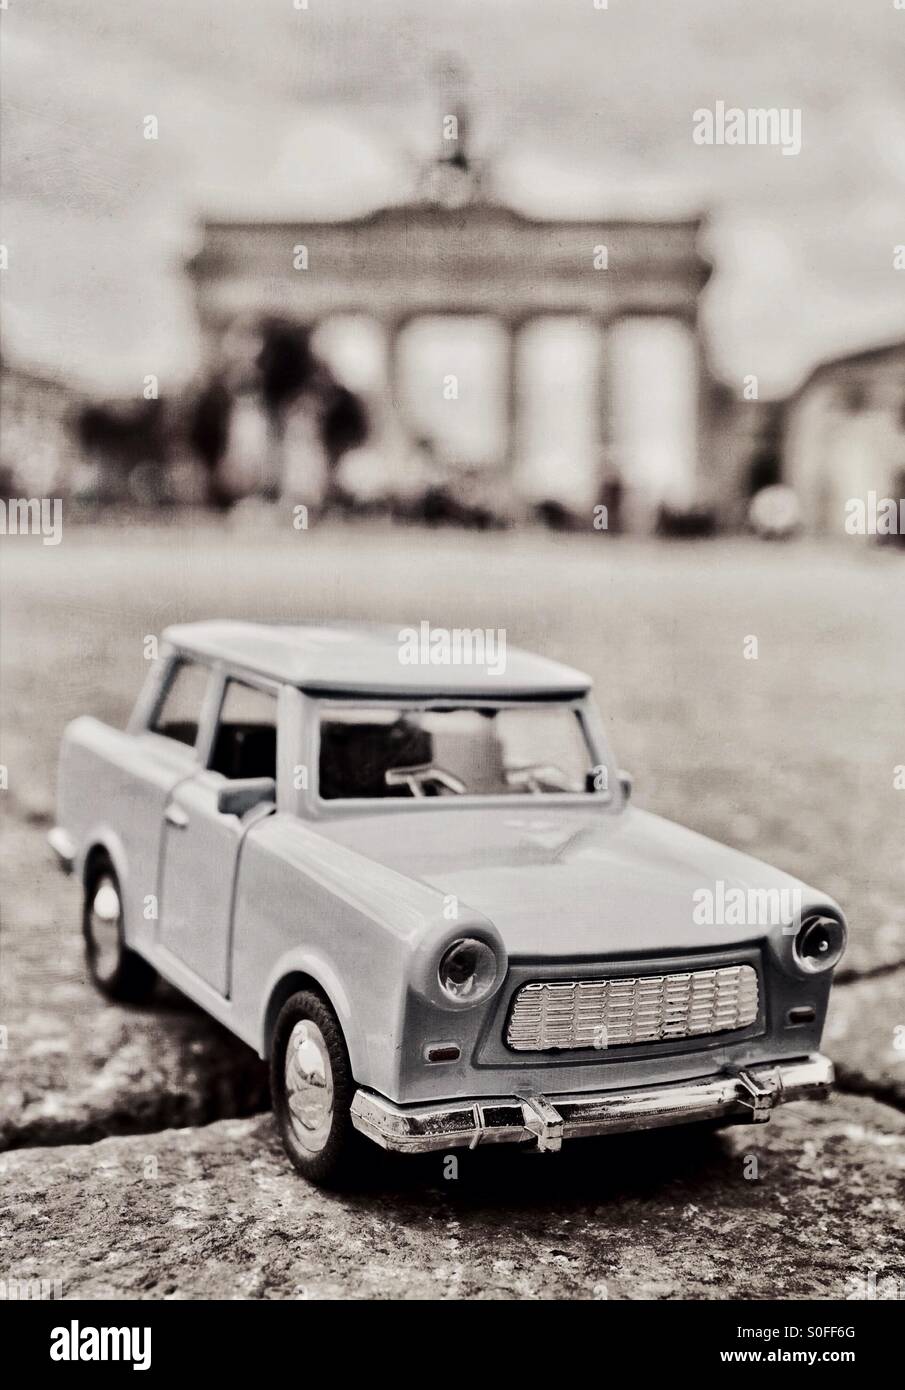 Iconic Berlin - A toy Trabant car in front of The Brandenburg Gate in Berlin Germany EU Stock Photo